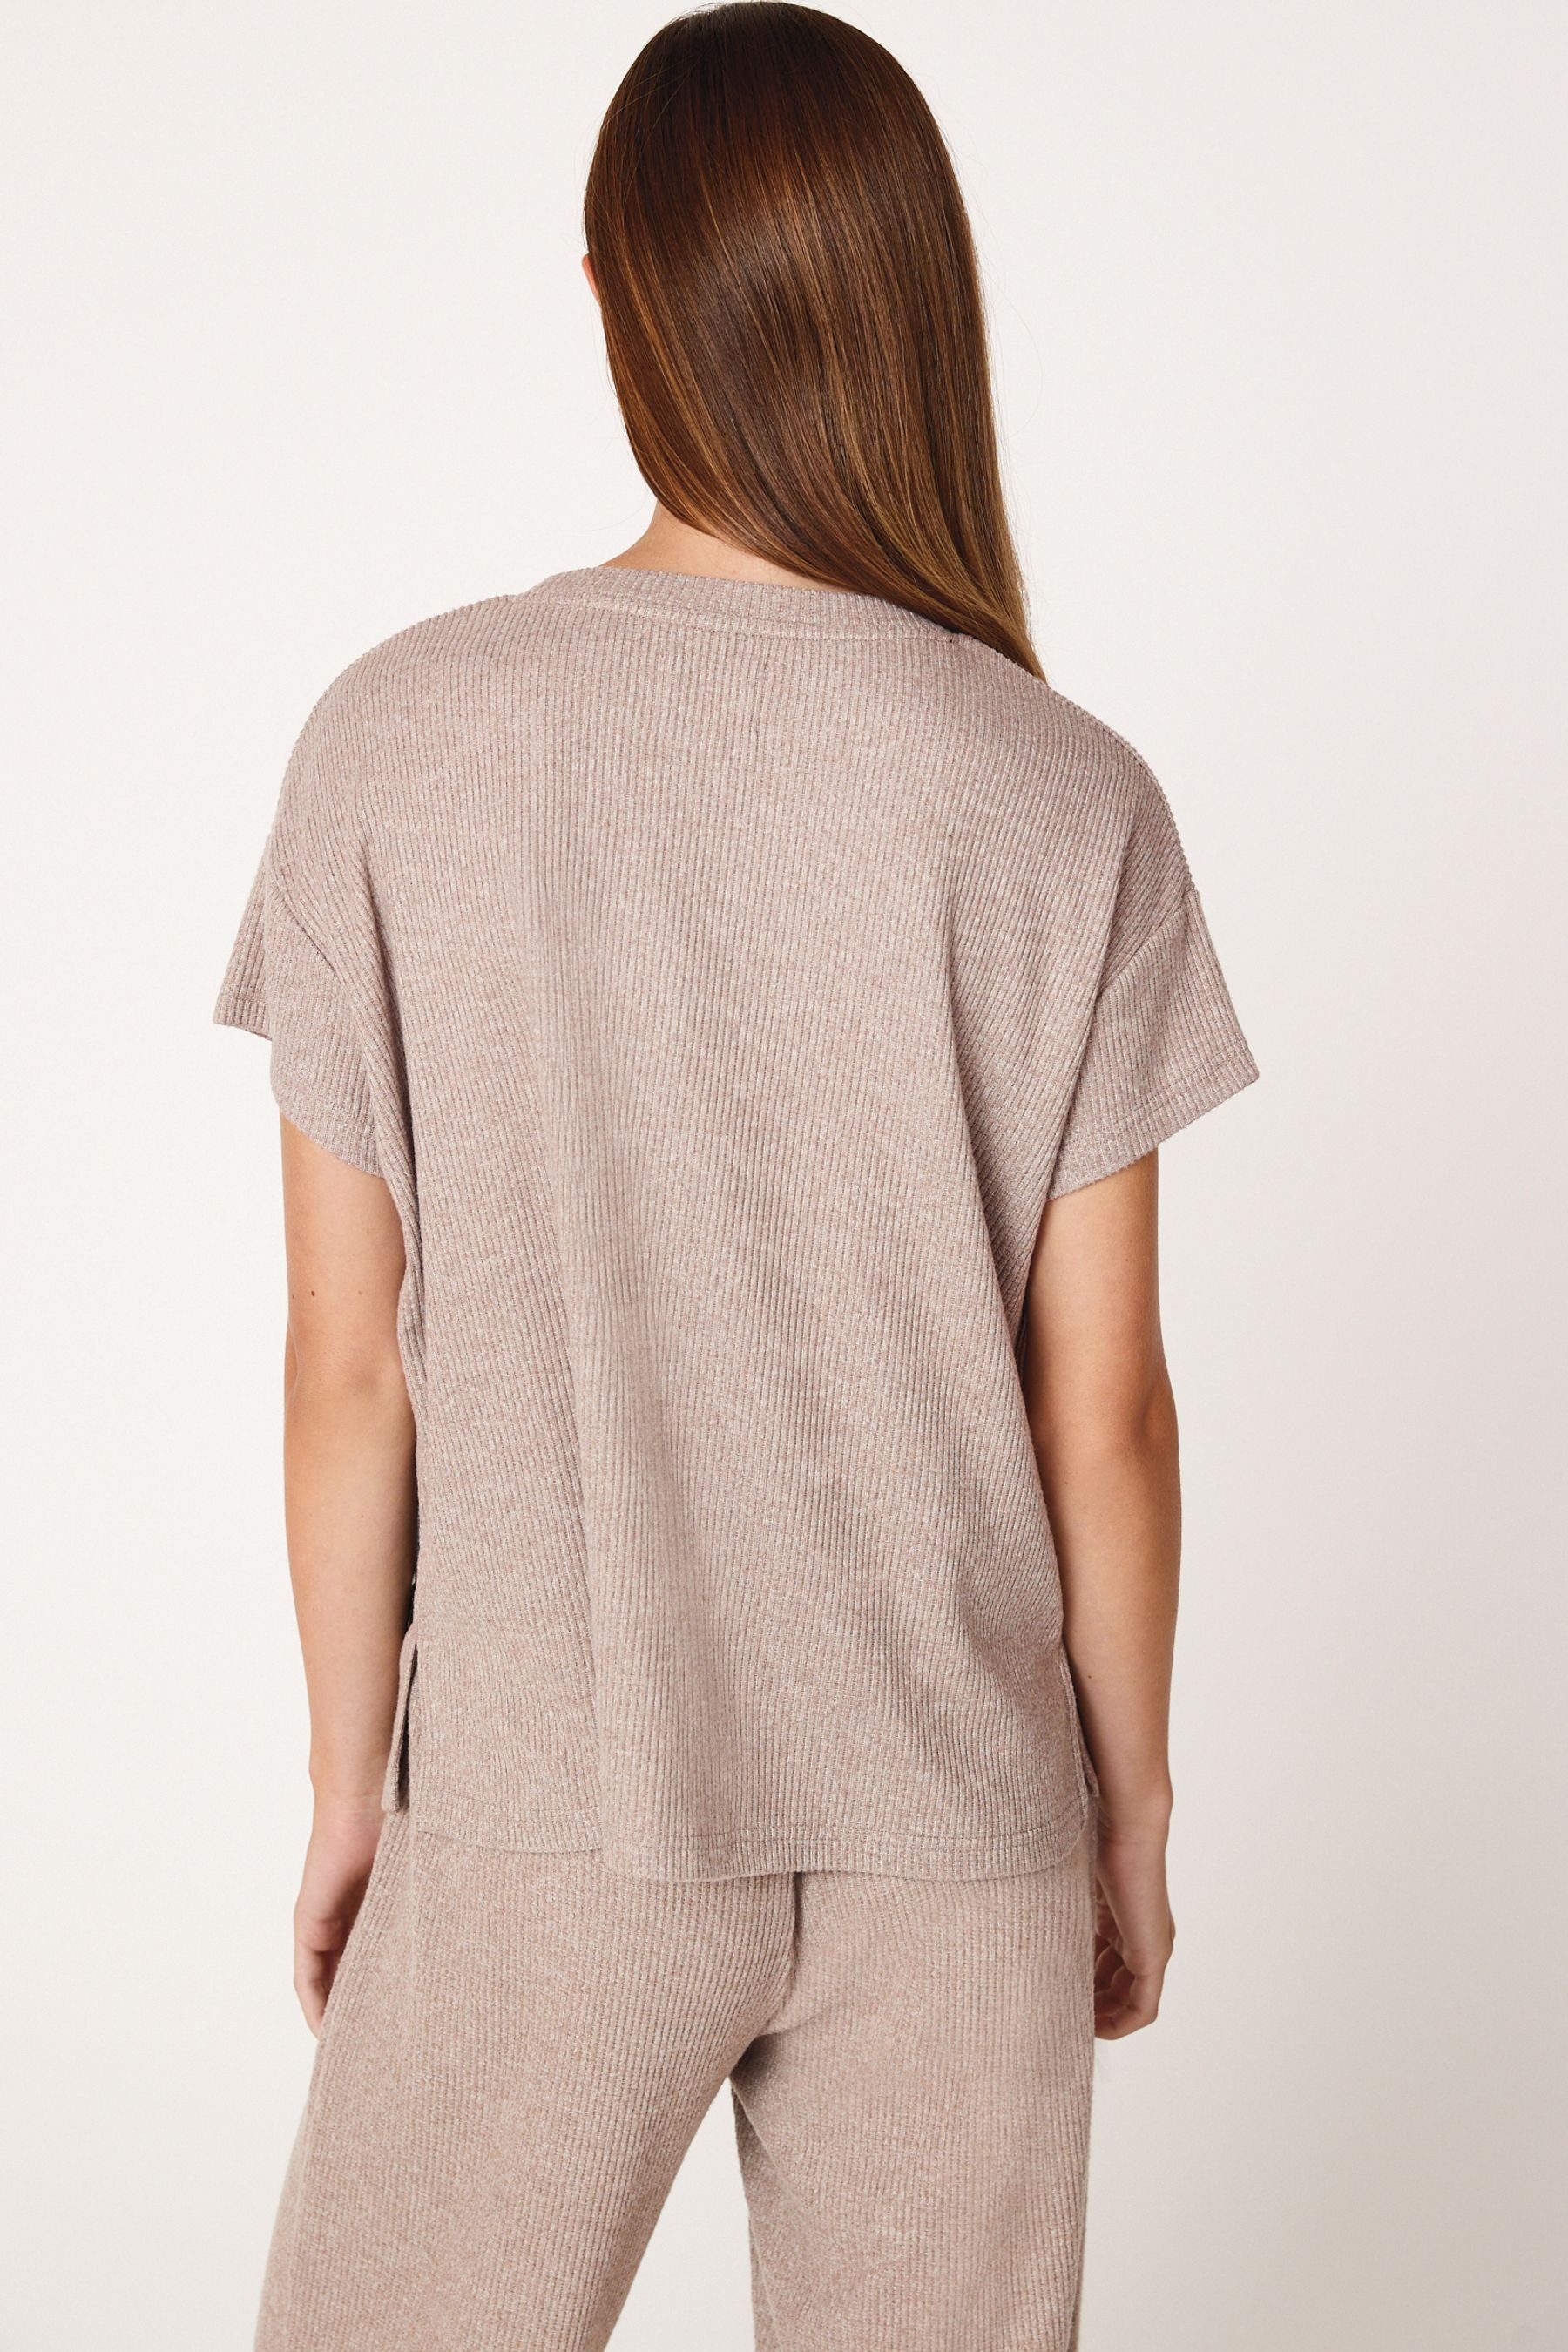 Ted by Geripptes (1-tlg) B Baker T-Shirt Loungewear by T-Shirt B Brown Baker Mocha Ted